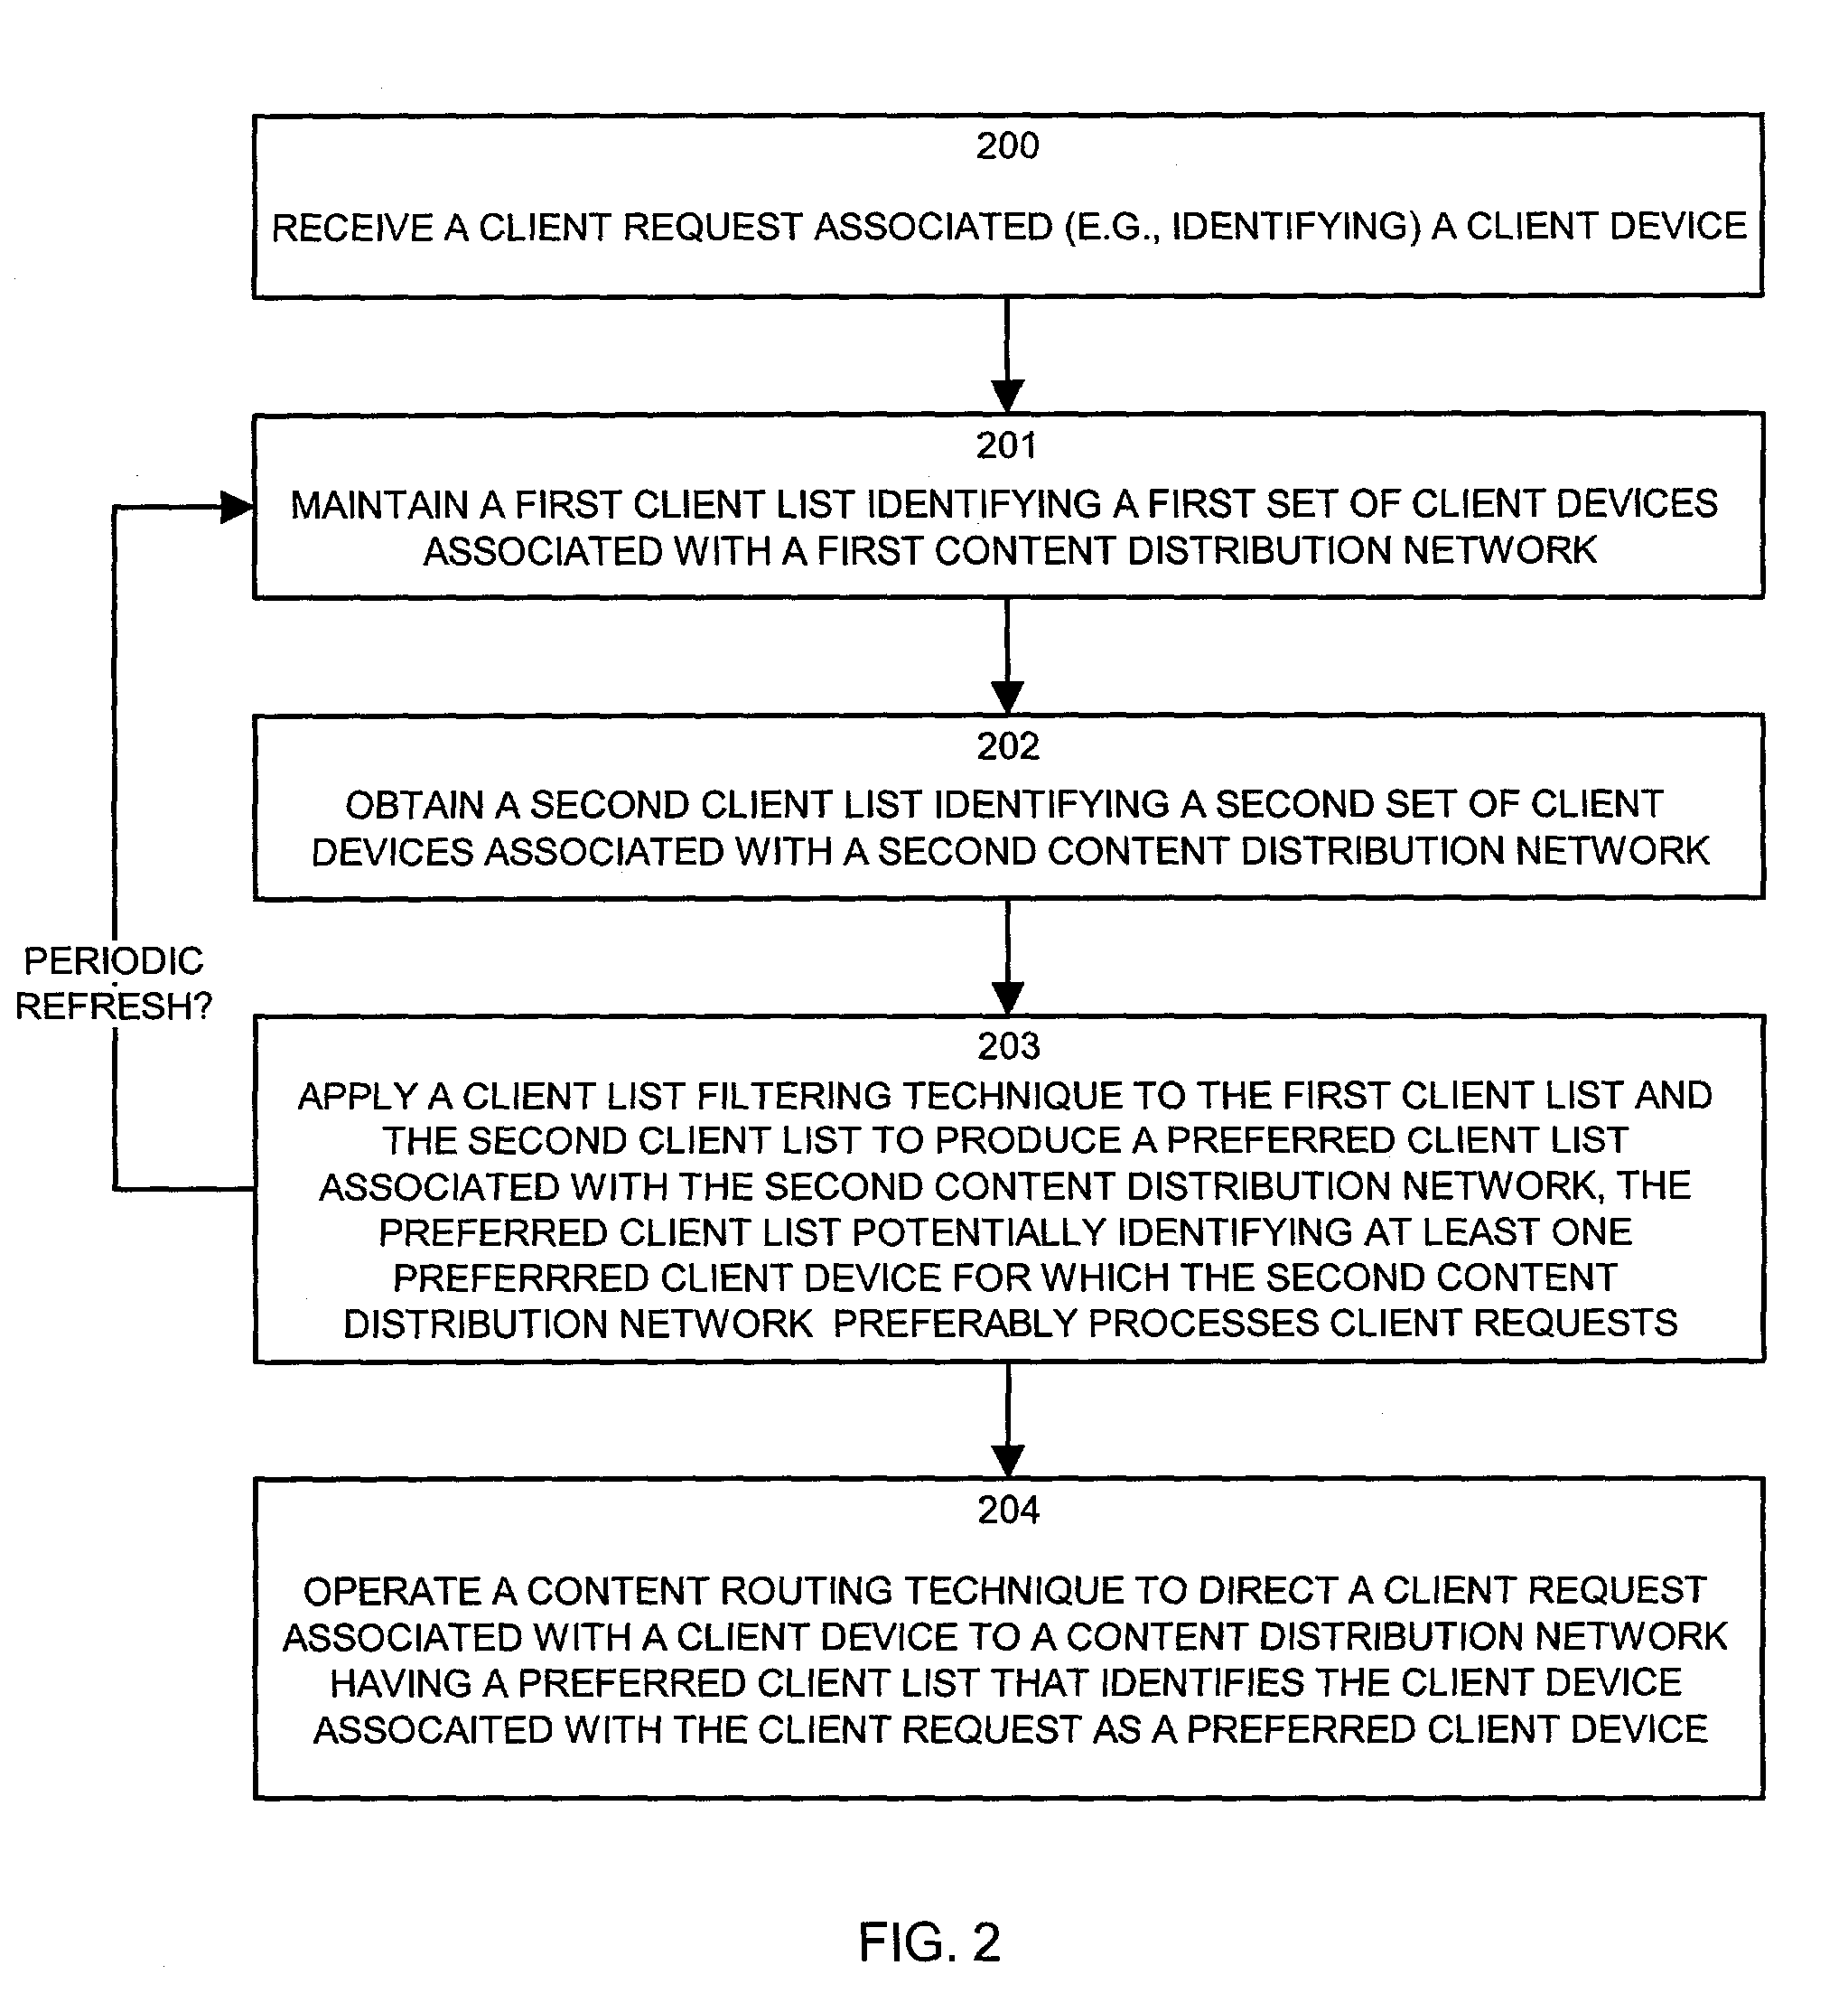 Methods and apparatus for processing client requests in a content distribution network using client lists